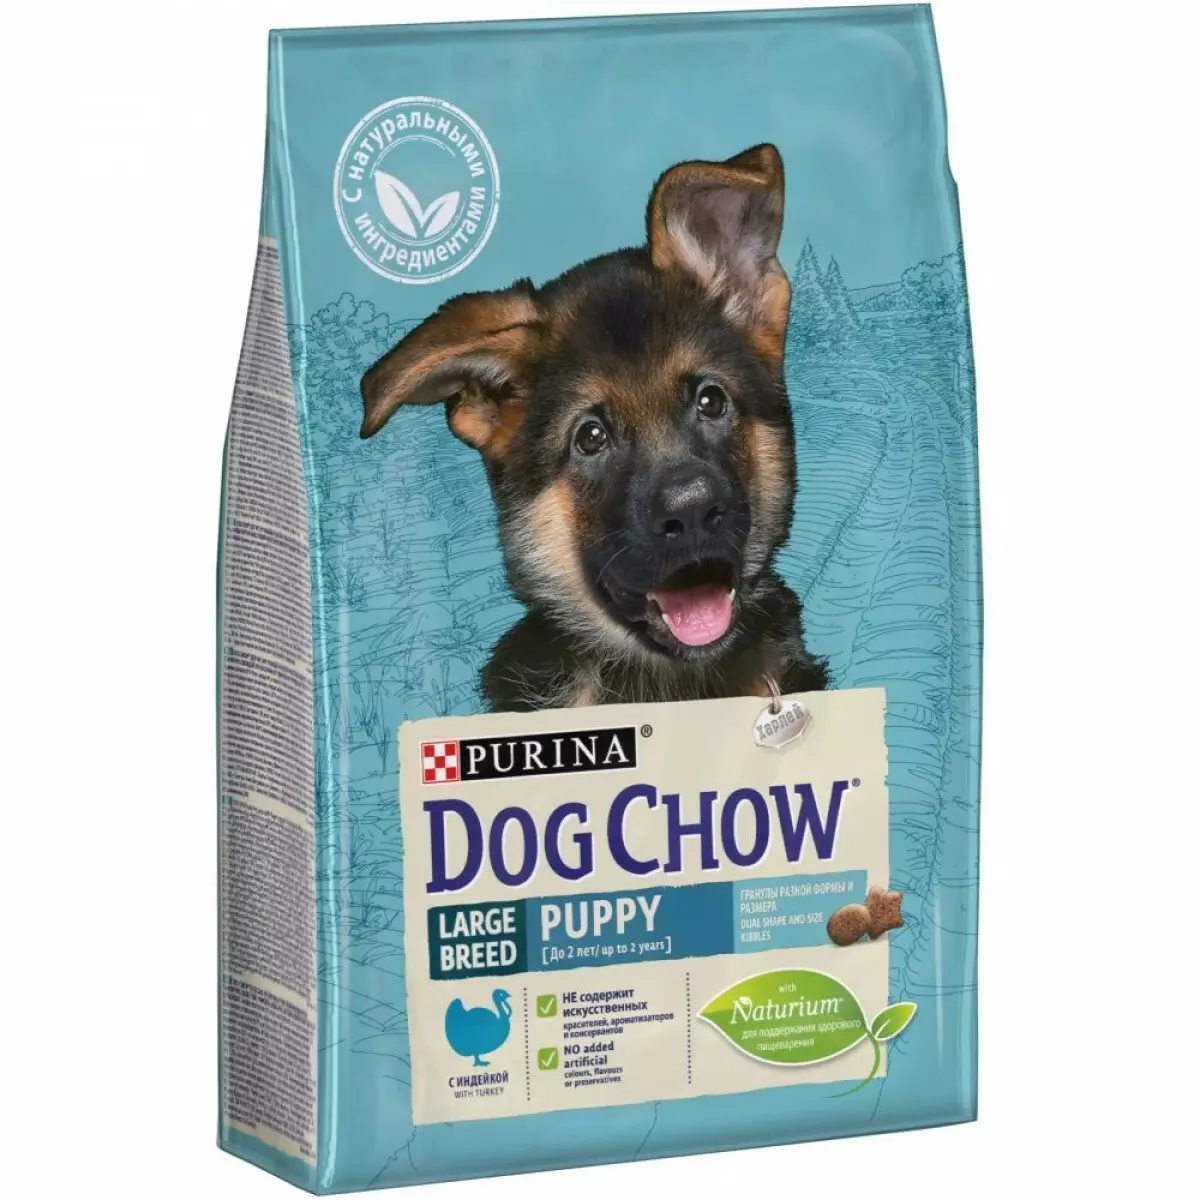 Purina Dog Chow for dogs of large breeds: puppies and adult dog food, dry food dosage and composition 23265_7